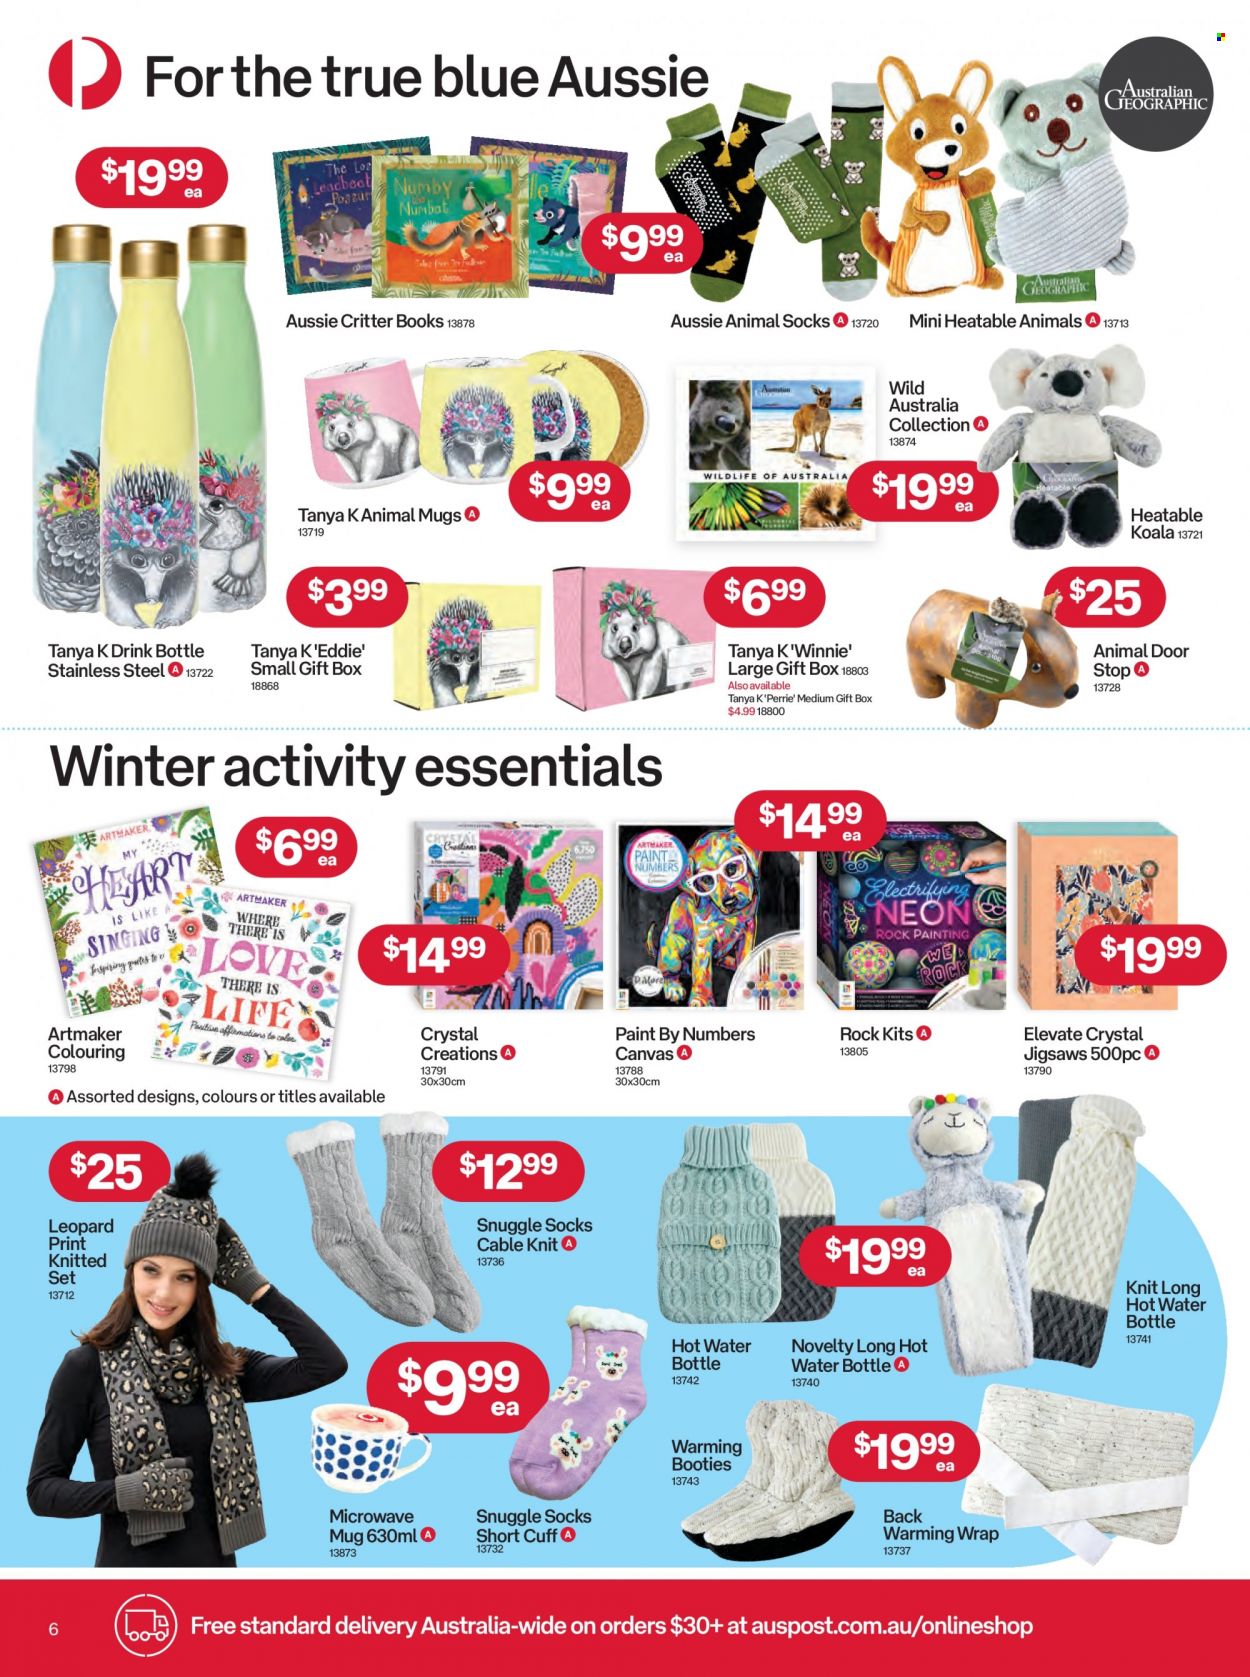 thumbnail - Australia Post Catalogue - 9 May 2022 - 5 Jun 2022 - Sales products - Aussie, mug, drink bottle, gift box, canvas, book, microwave. Page 6.